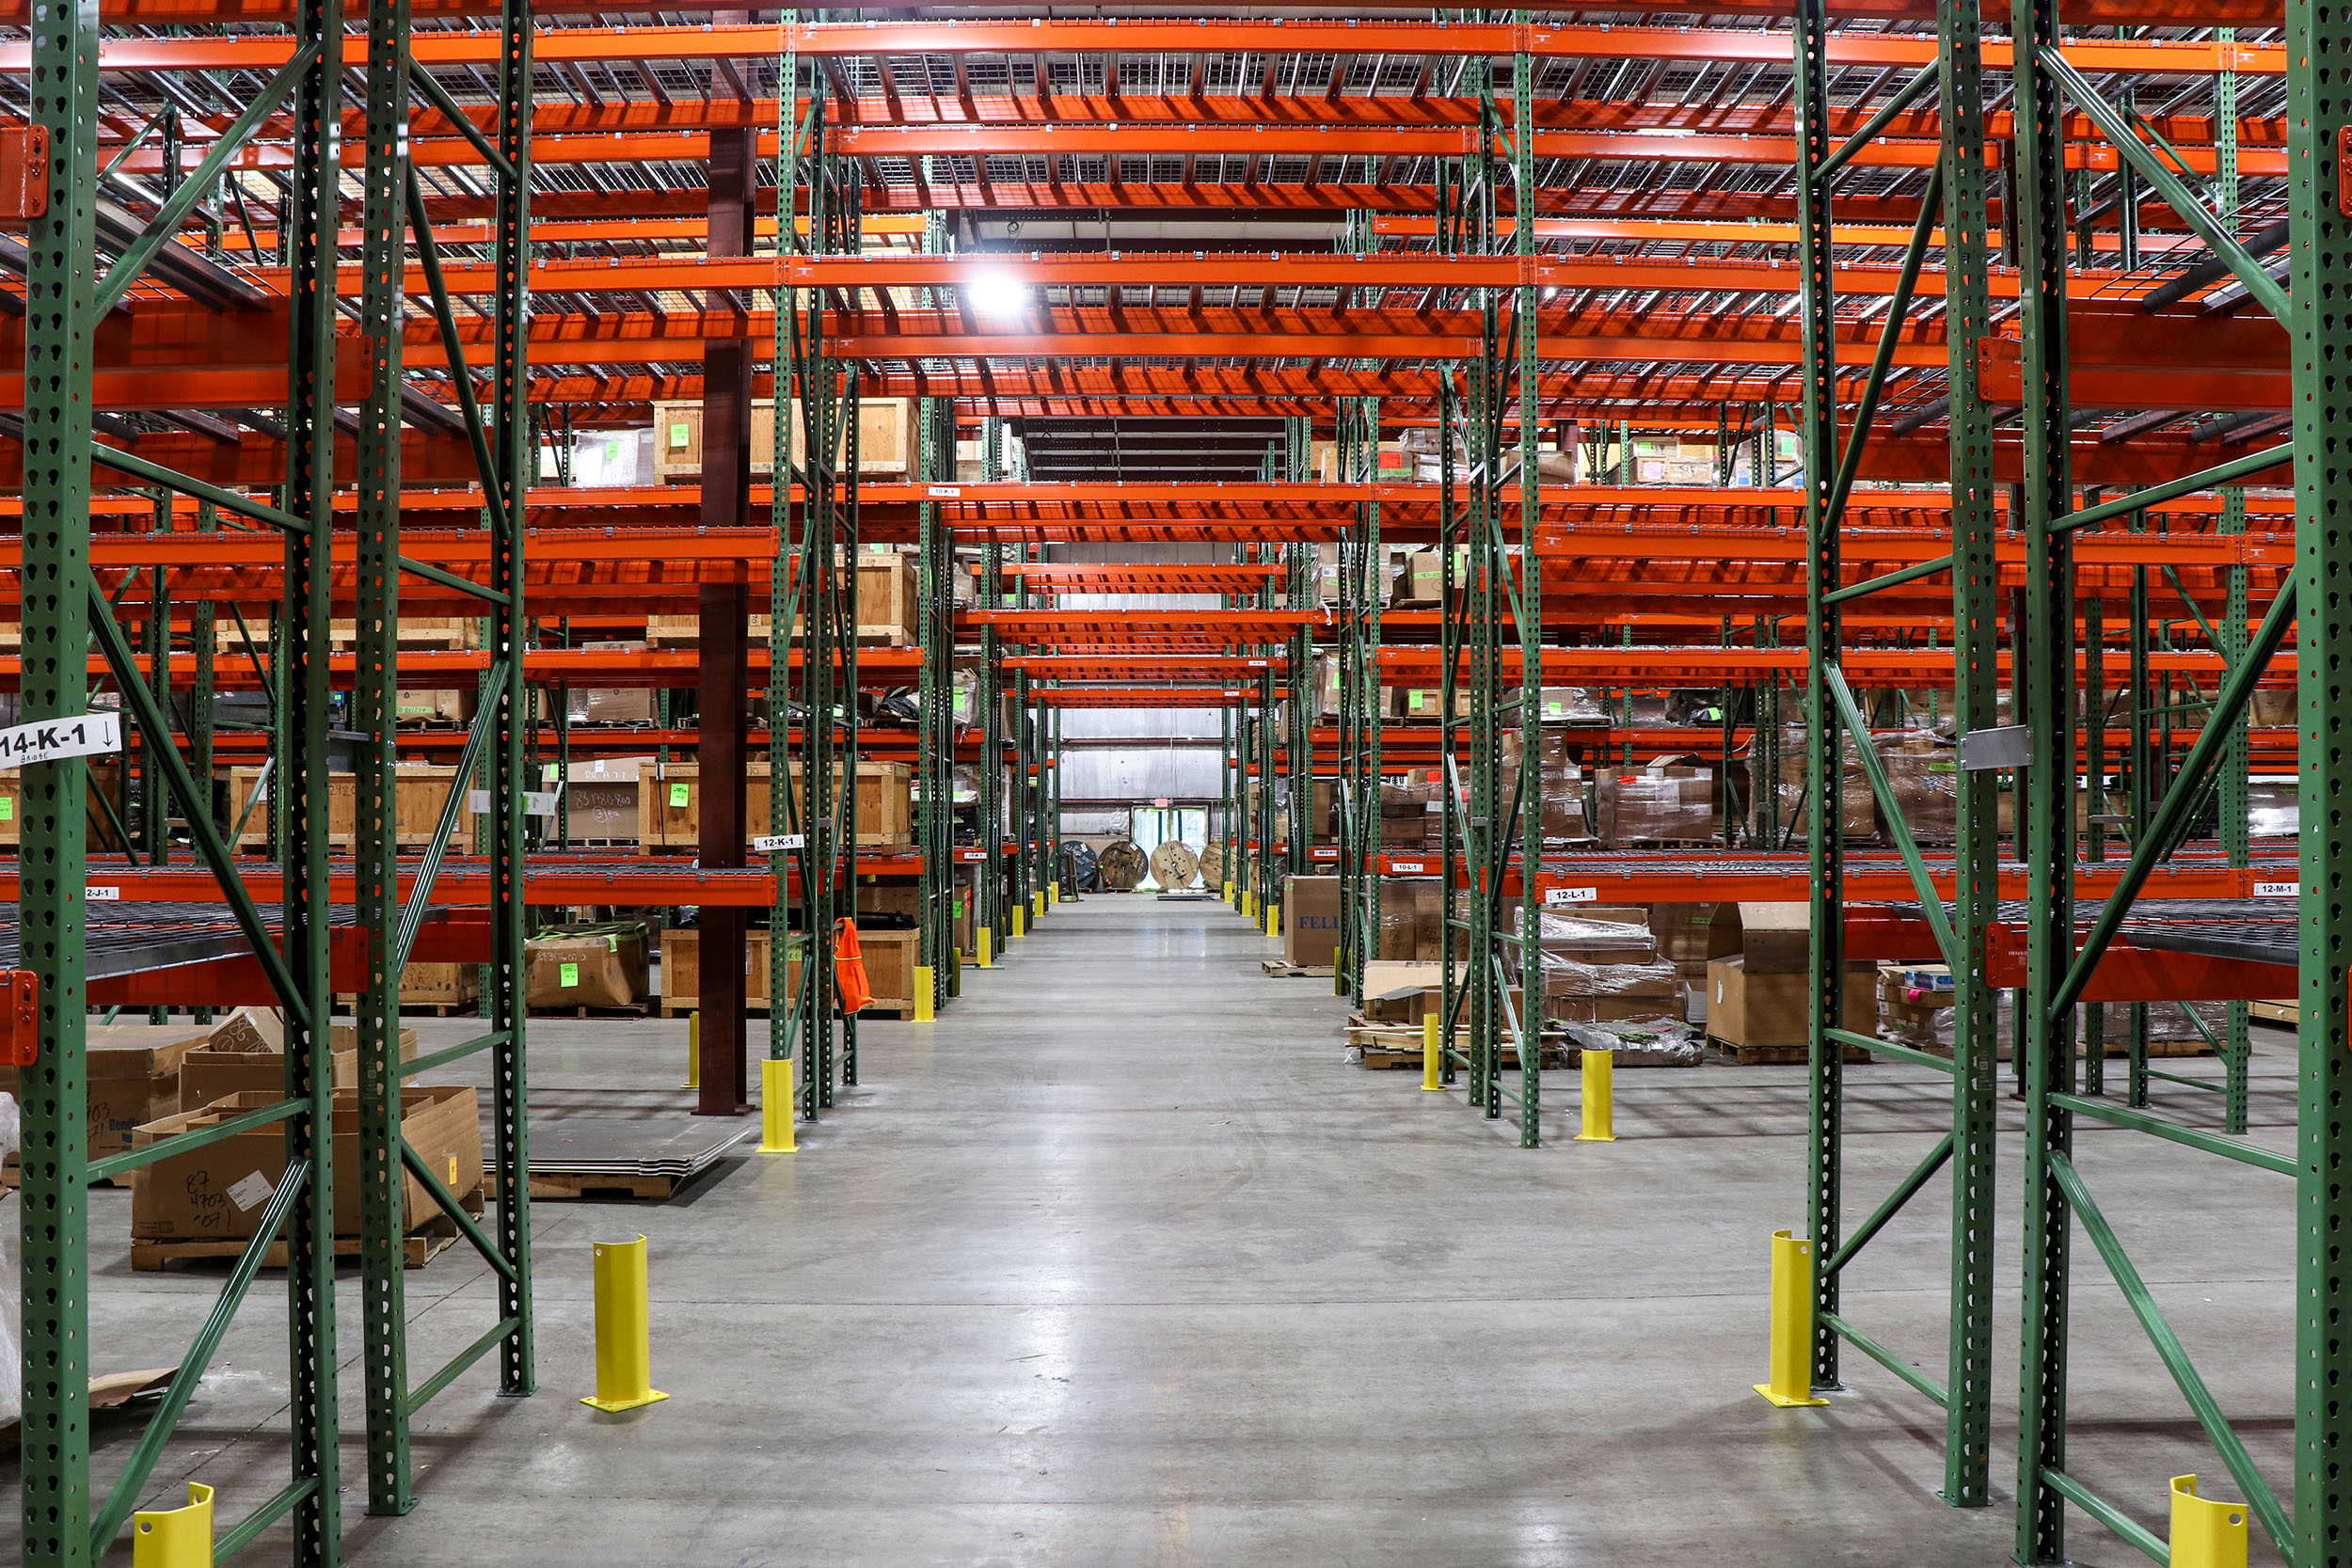 Warehouse & Racking - We are authorized dealers for the leading names in the warehouse and racking products, including Rousseau, Nordock, Cogan, Starrco, Modula, Husky Rack & Wire, and more.